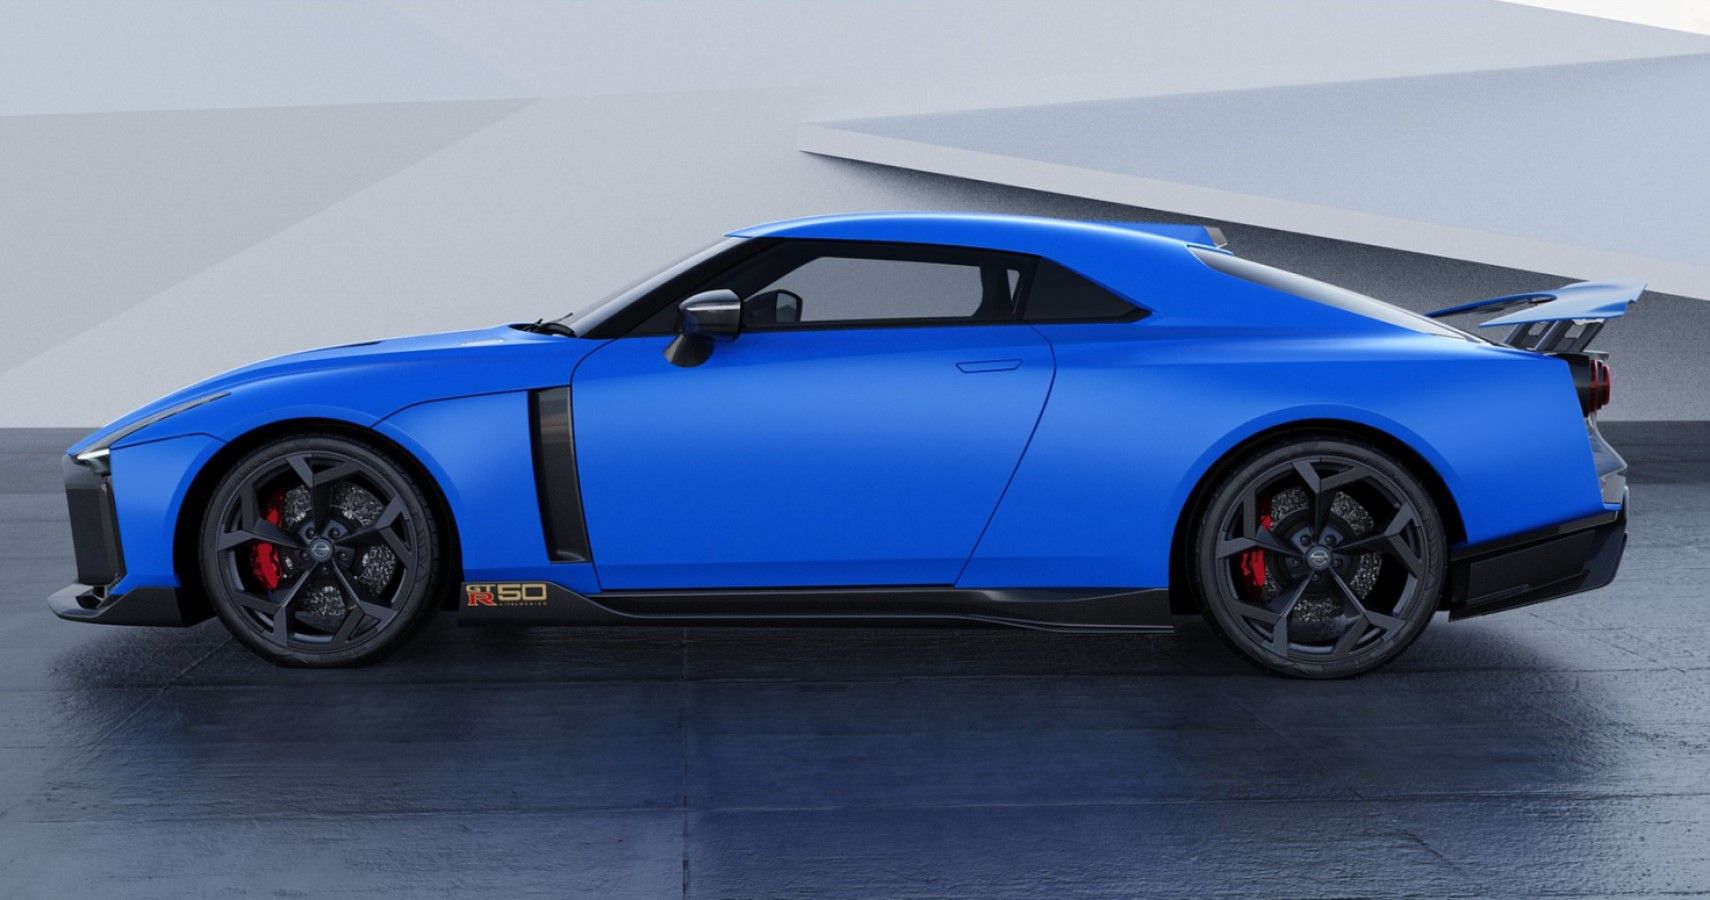 2021 Nissan GT-R50 Italdesign side view in blue